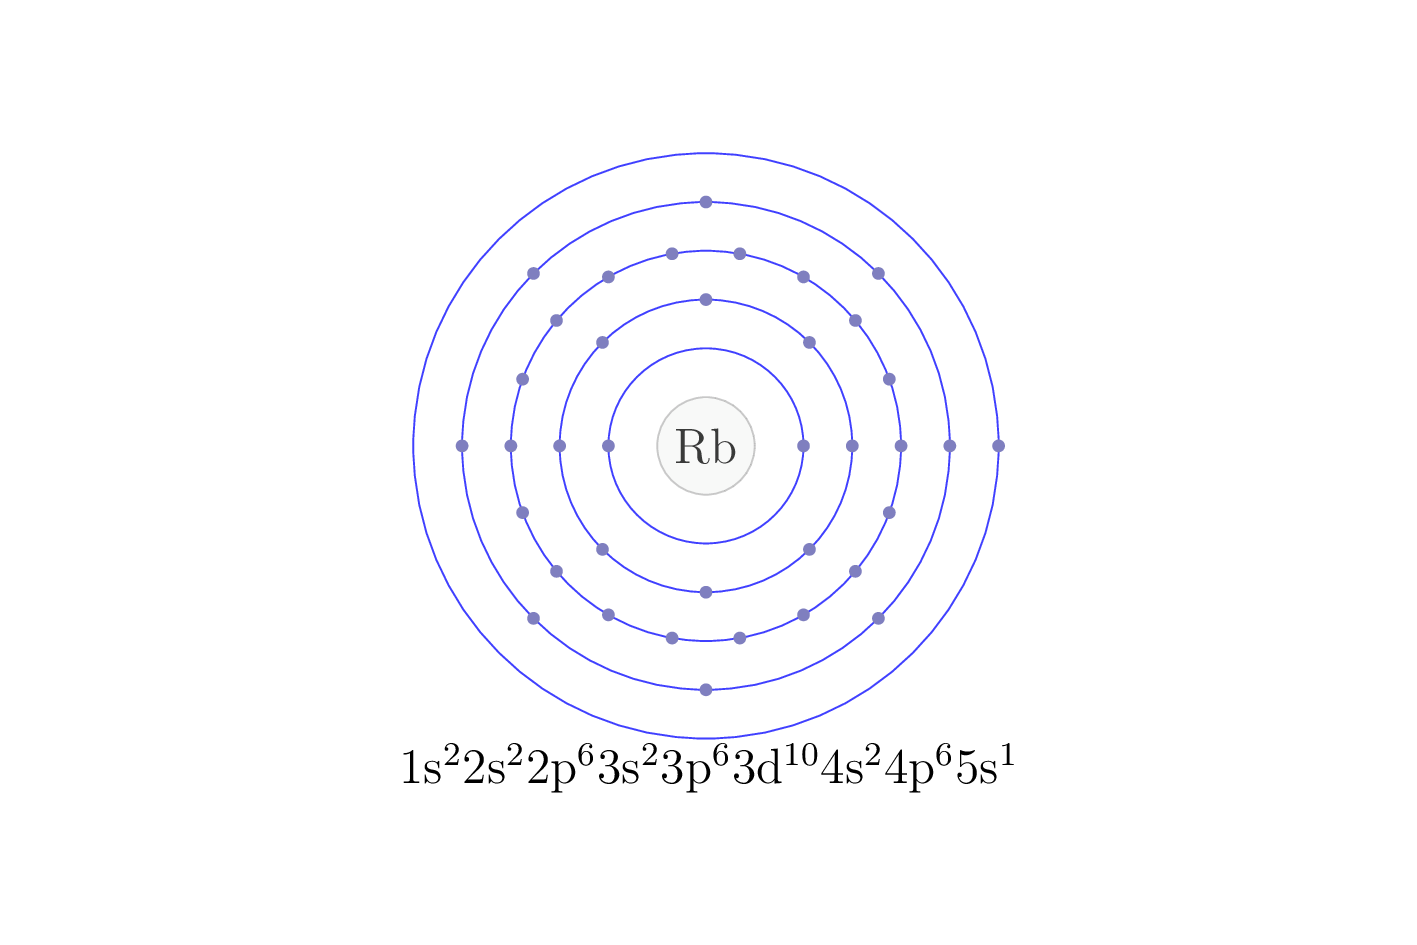 electron configuration of element Rb